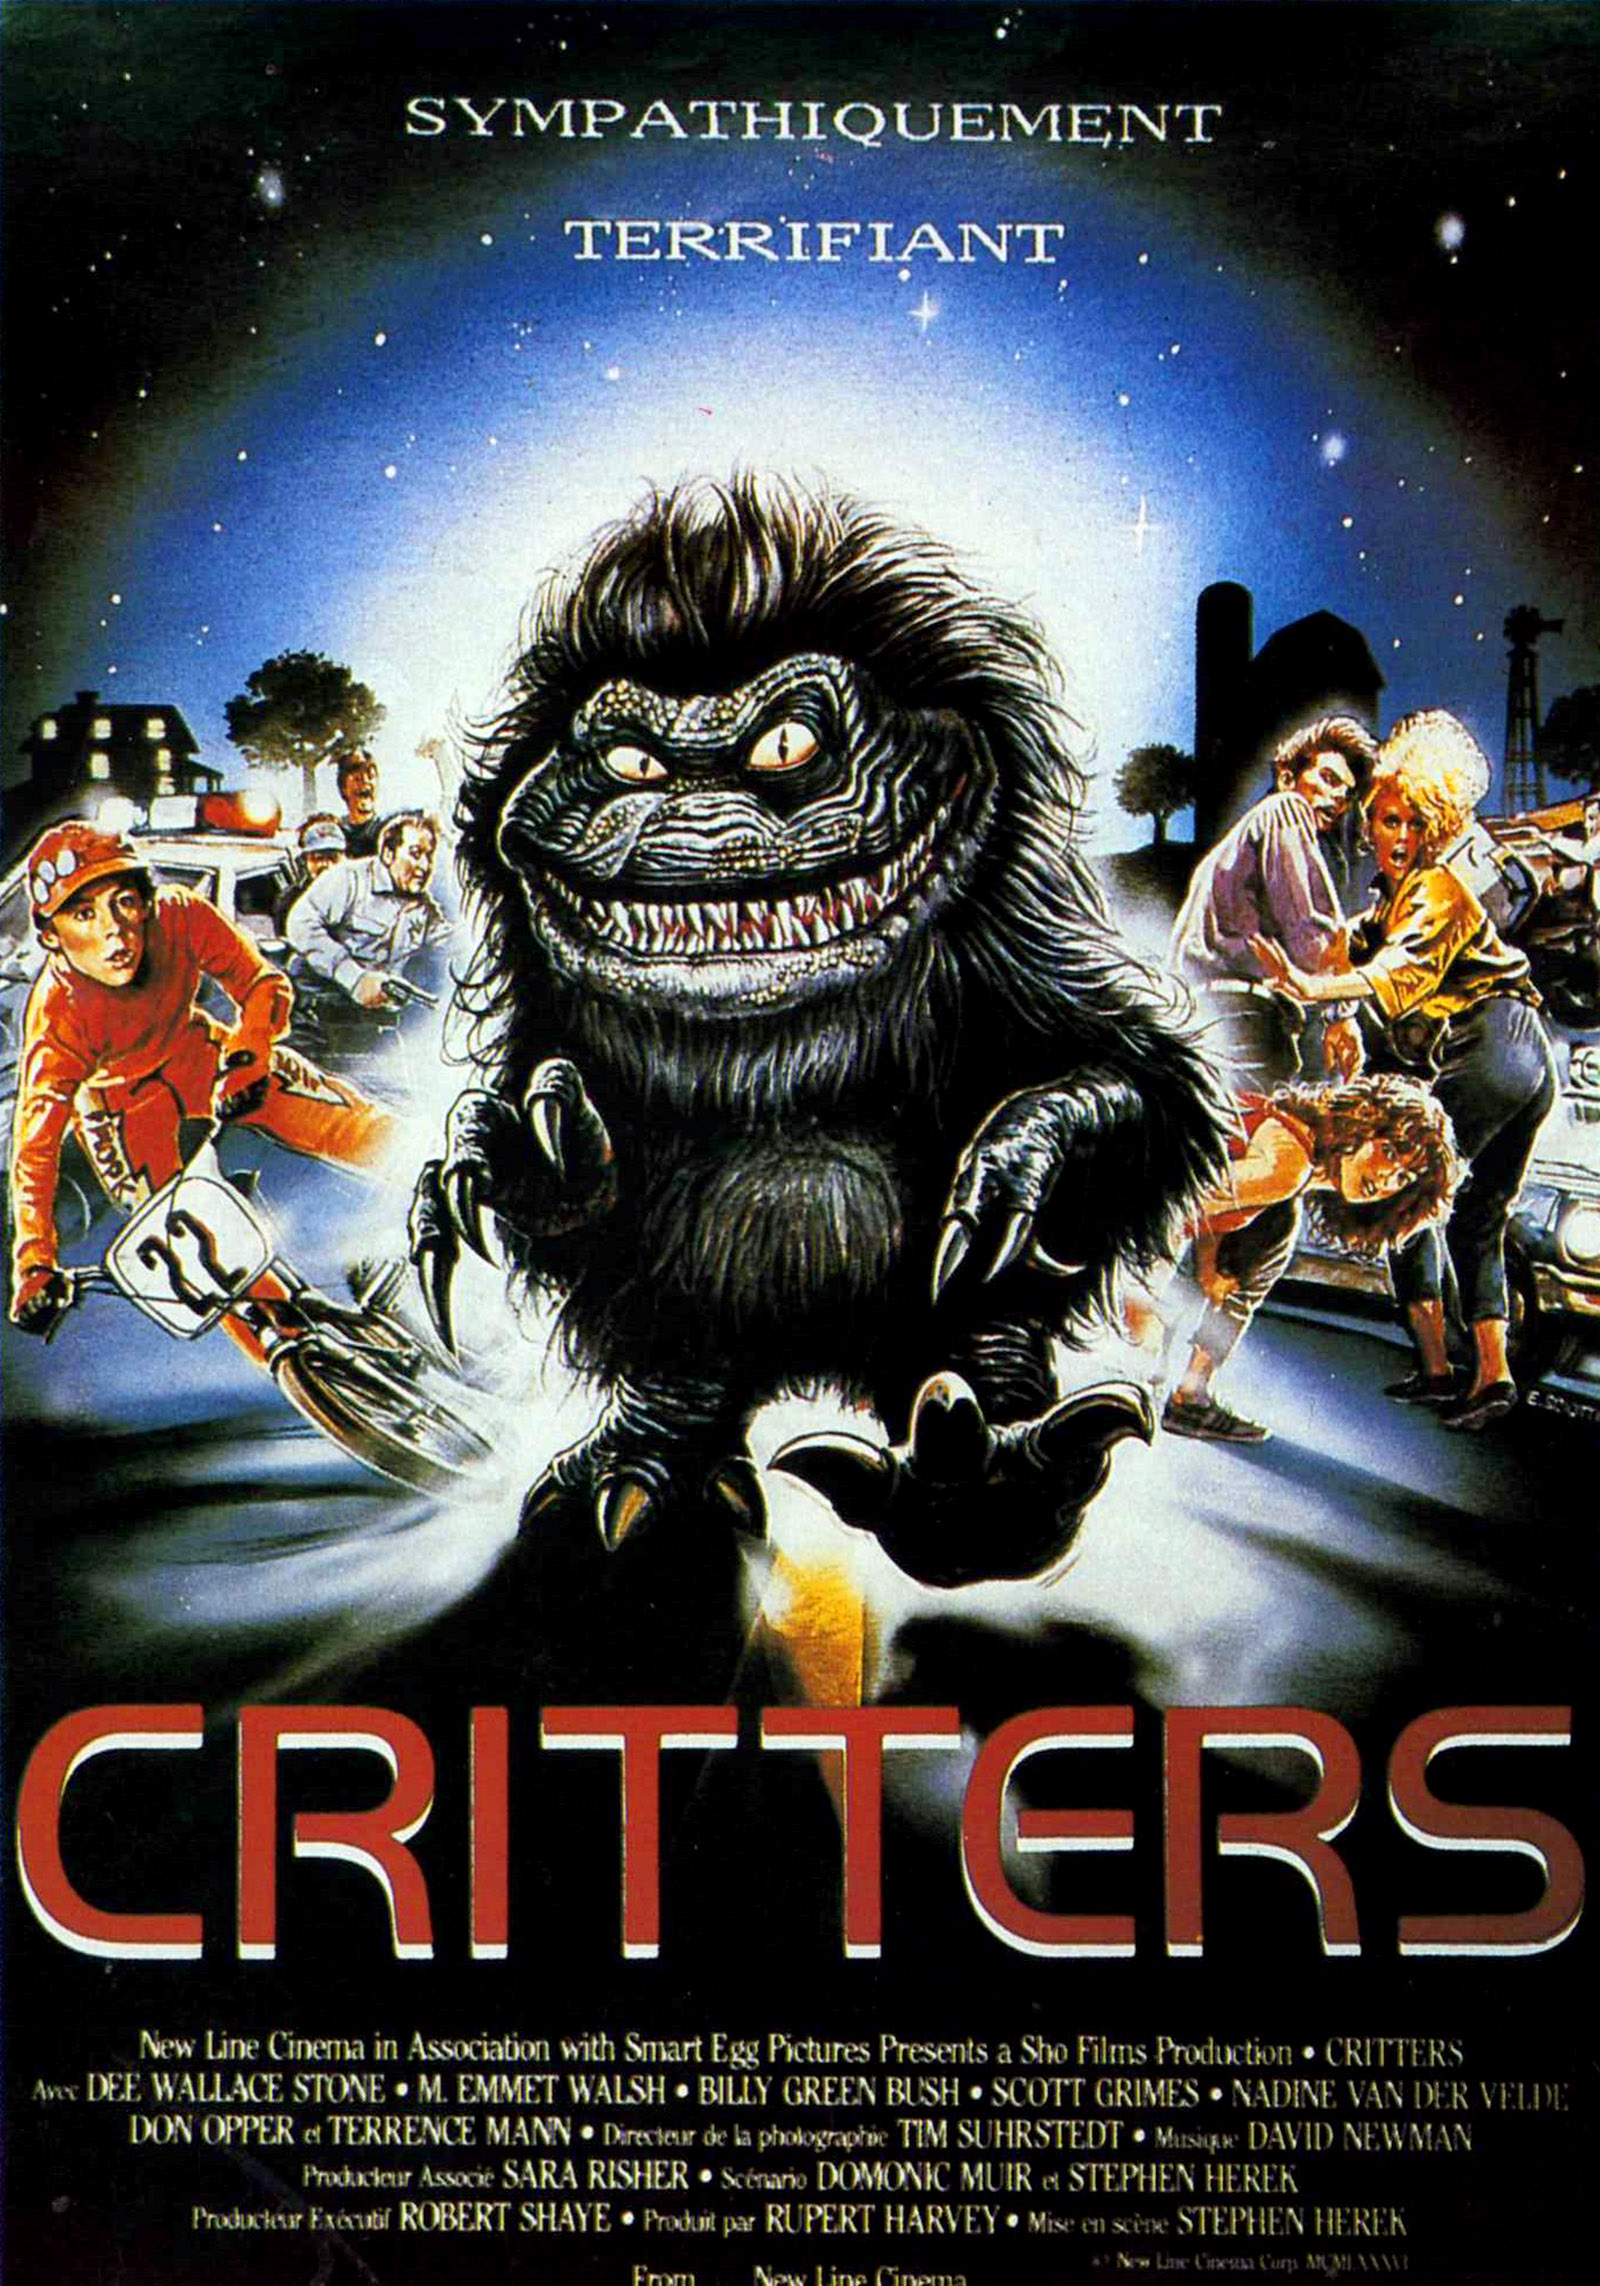 Timor Oriental Robar a Mujer hermosa critters-1-movie-poster-france-dvdbash-wordpress – The Fringes